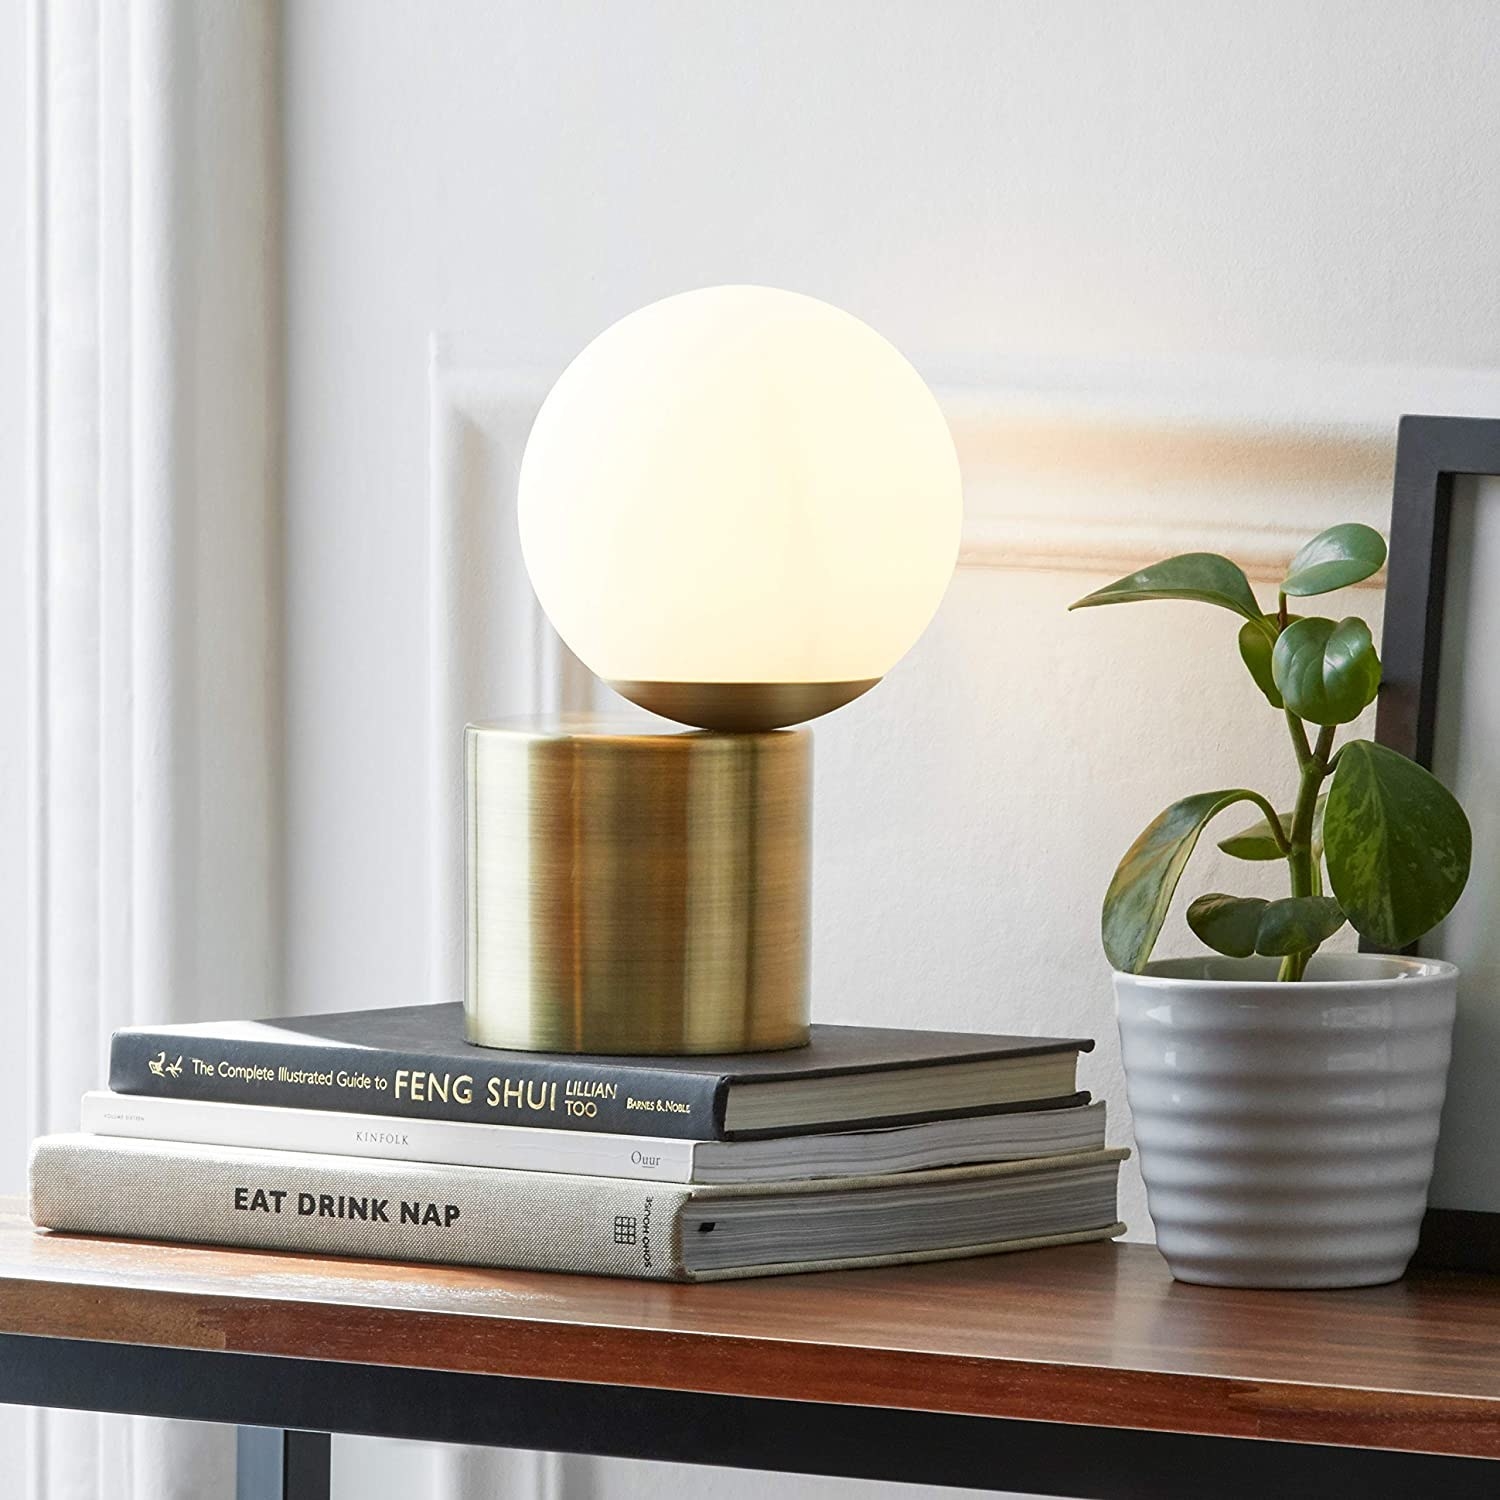 the gold rounded base lamp with round glass bulb off center from the base